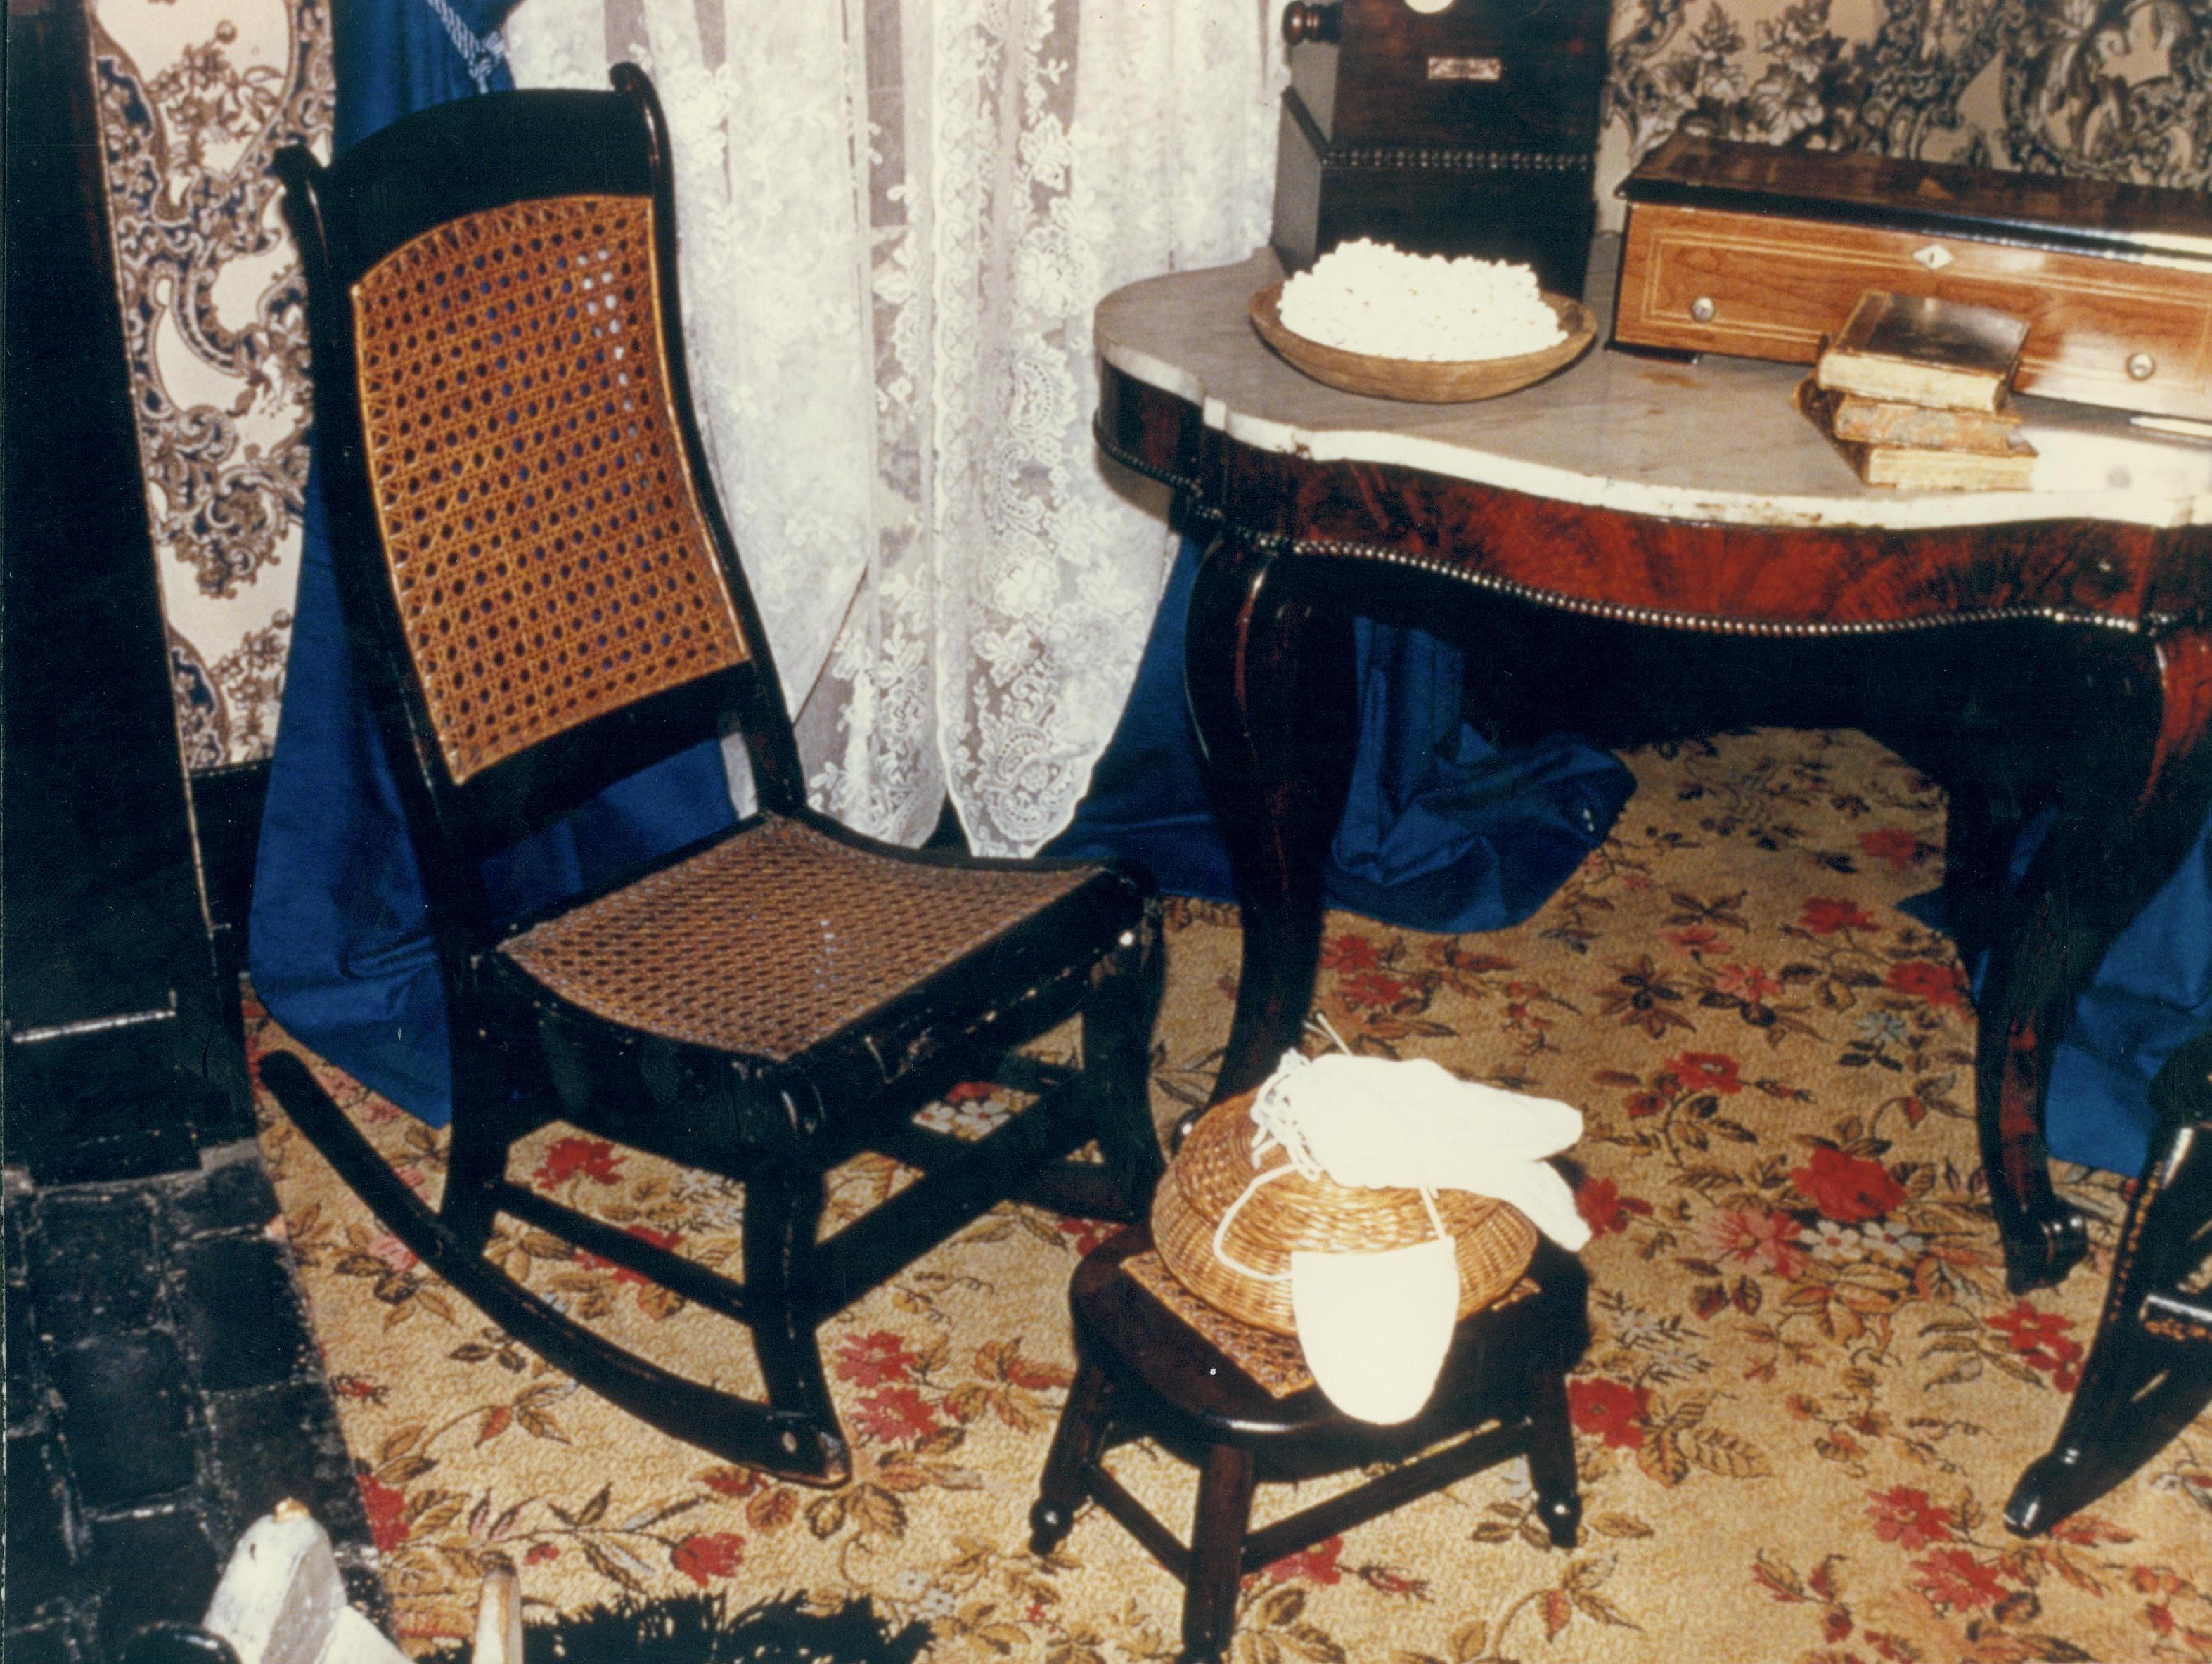 NA Lincoln, Home, Mrs., Mary, bedroom, chair, knitting